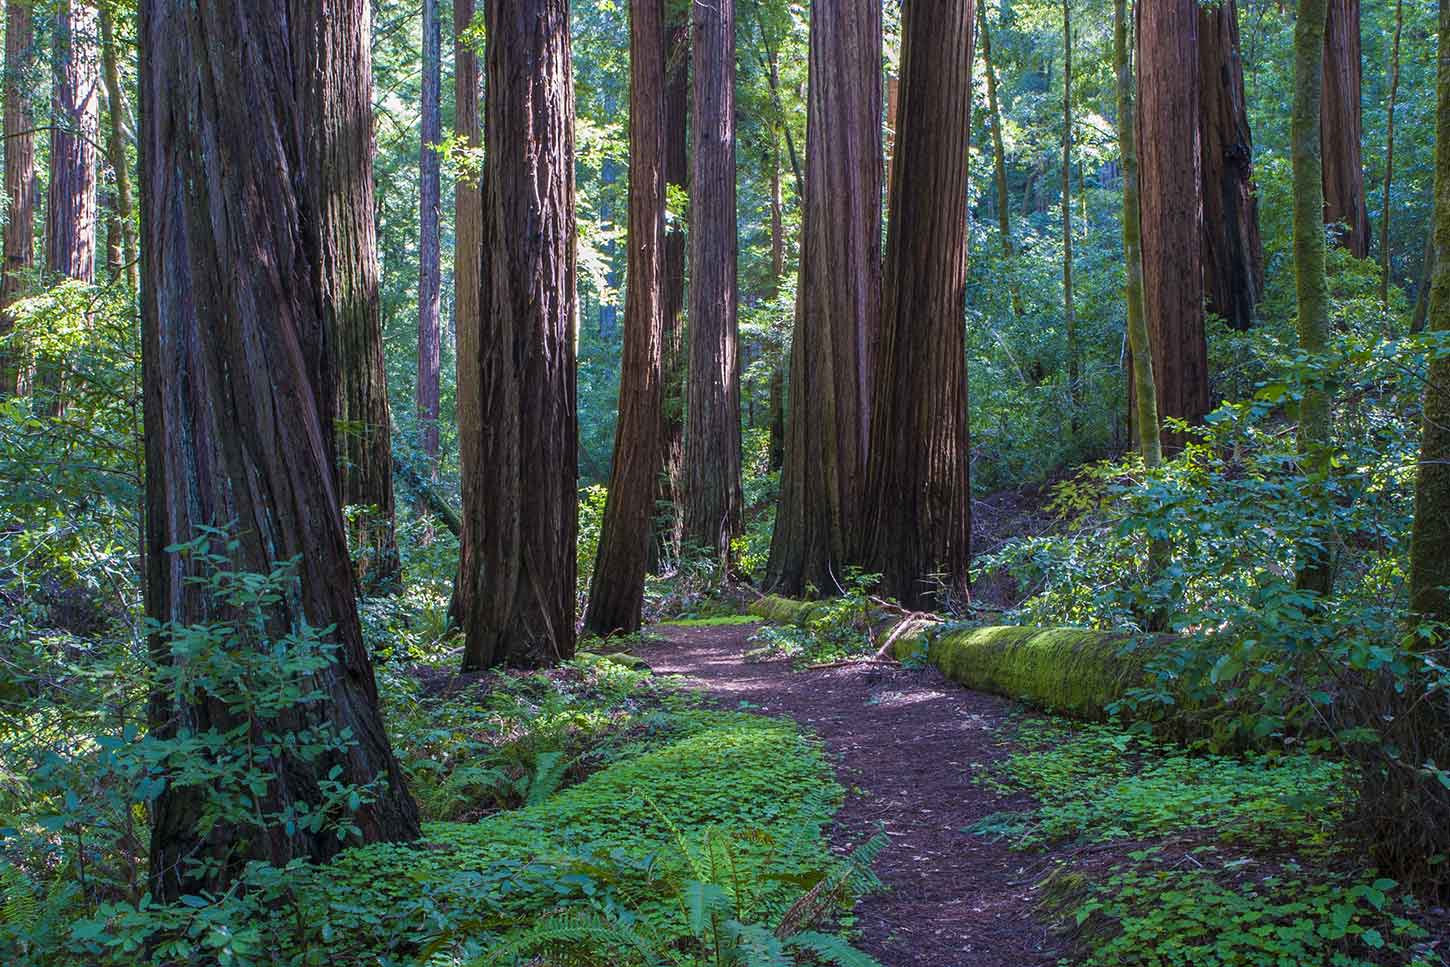 Big Basin Redwoods to Partially Reopen 2 Years After Devastating Fire